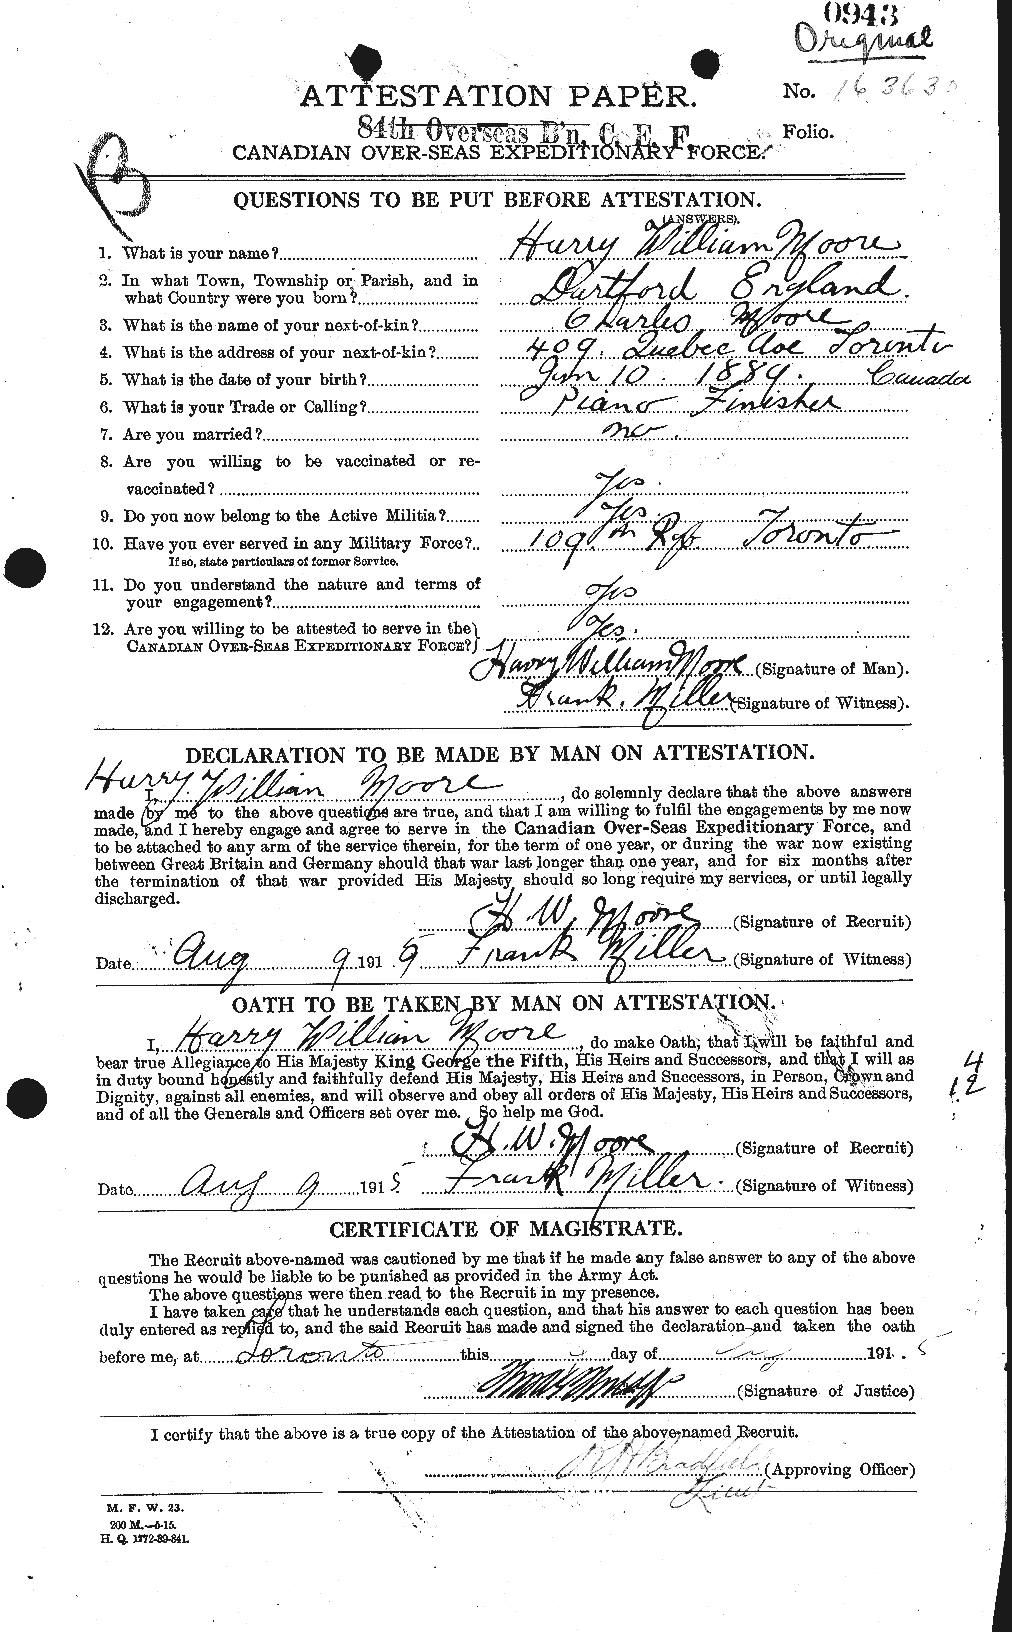 Personnel Records of the First World War - CEF 502090a